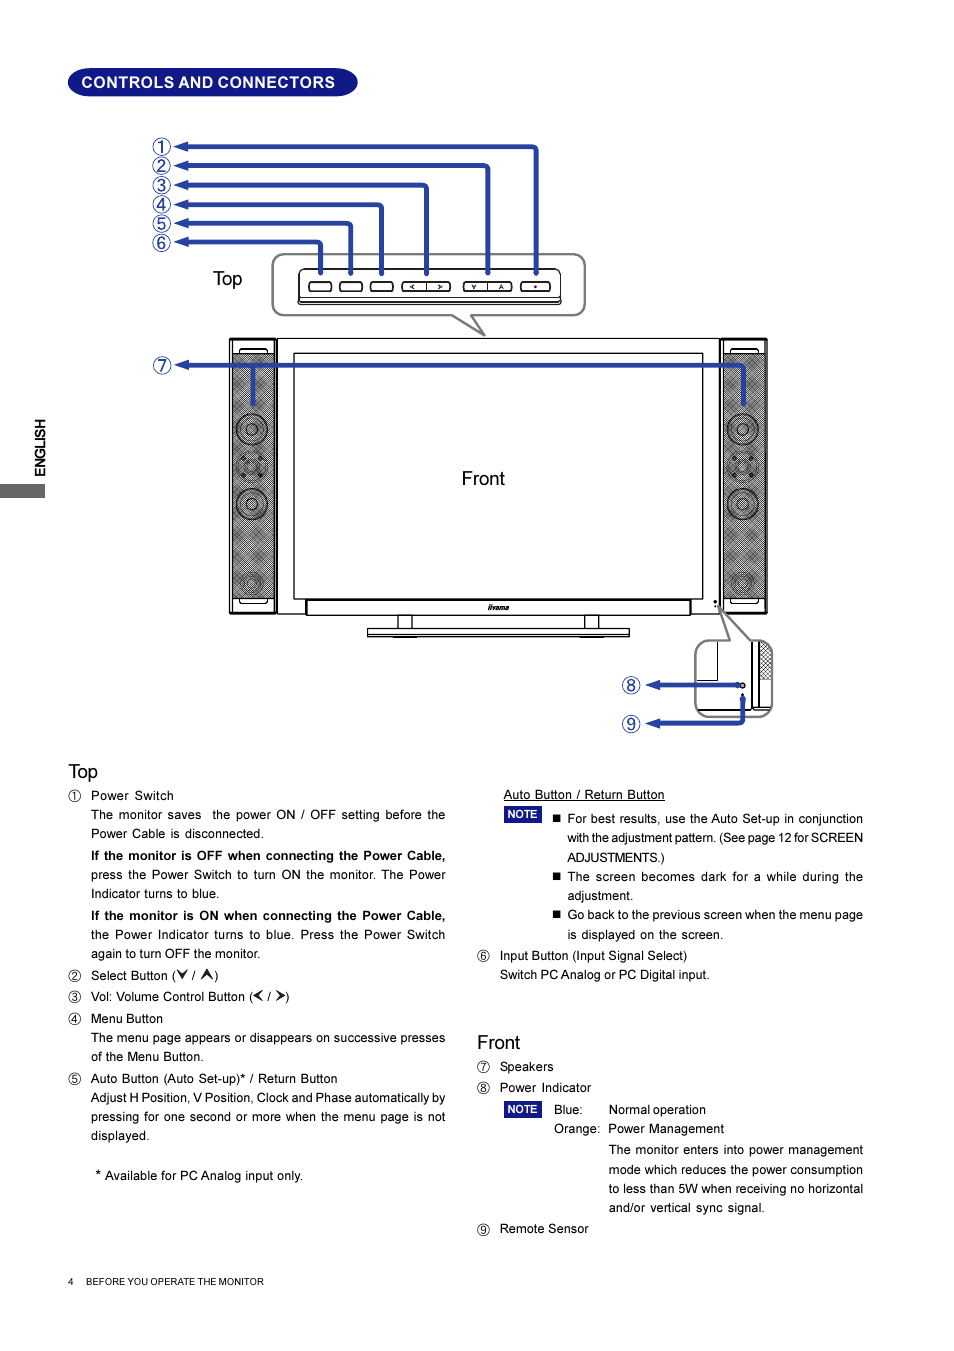 Front, Controls and connectors | Iiyama L403W User Manual | Page 6 / 32